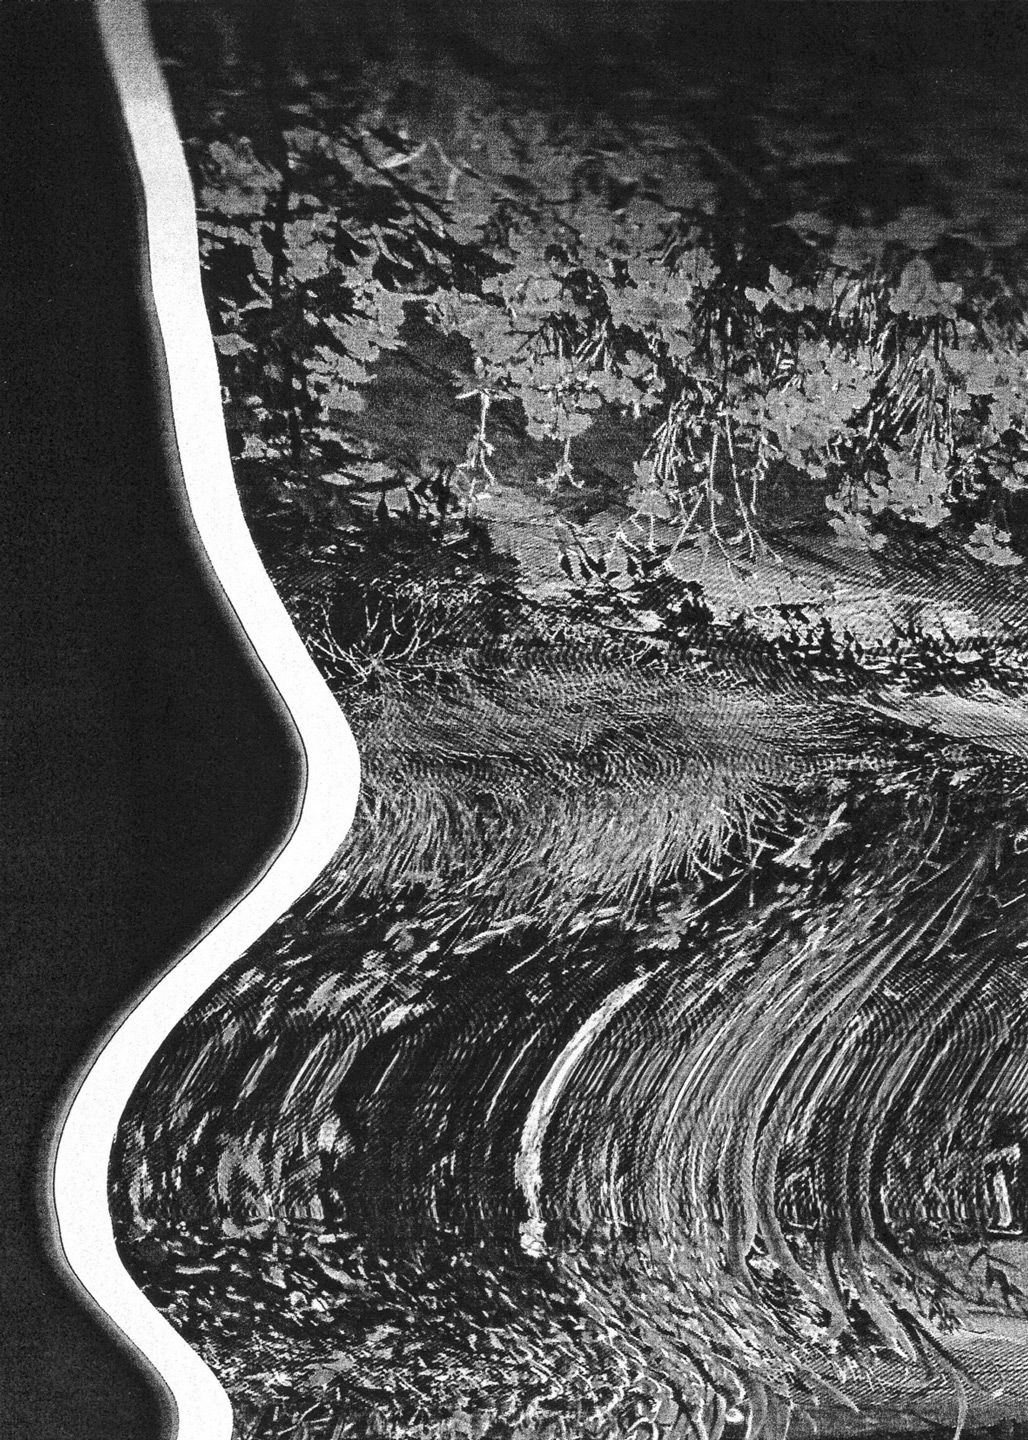 A scanography artwork depicting distorted and warped representations of natural elements. In this piece, some fragments of trees and leaves can be seen, but they are wavy and glitched. The abstract artwork is in black-and-white. 